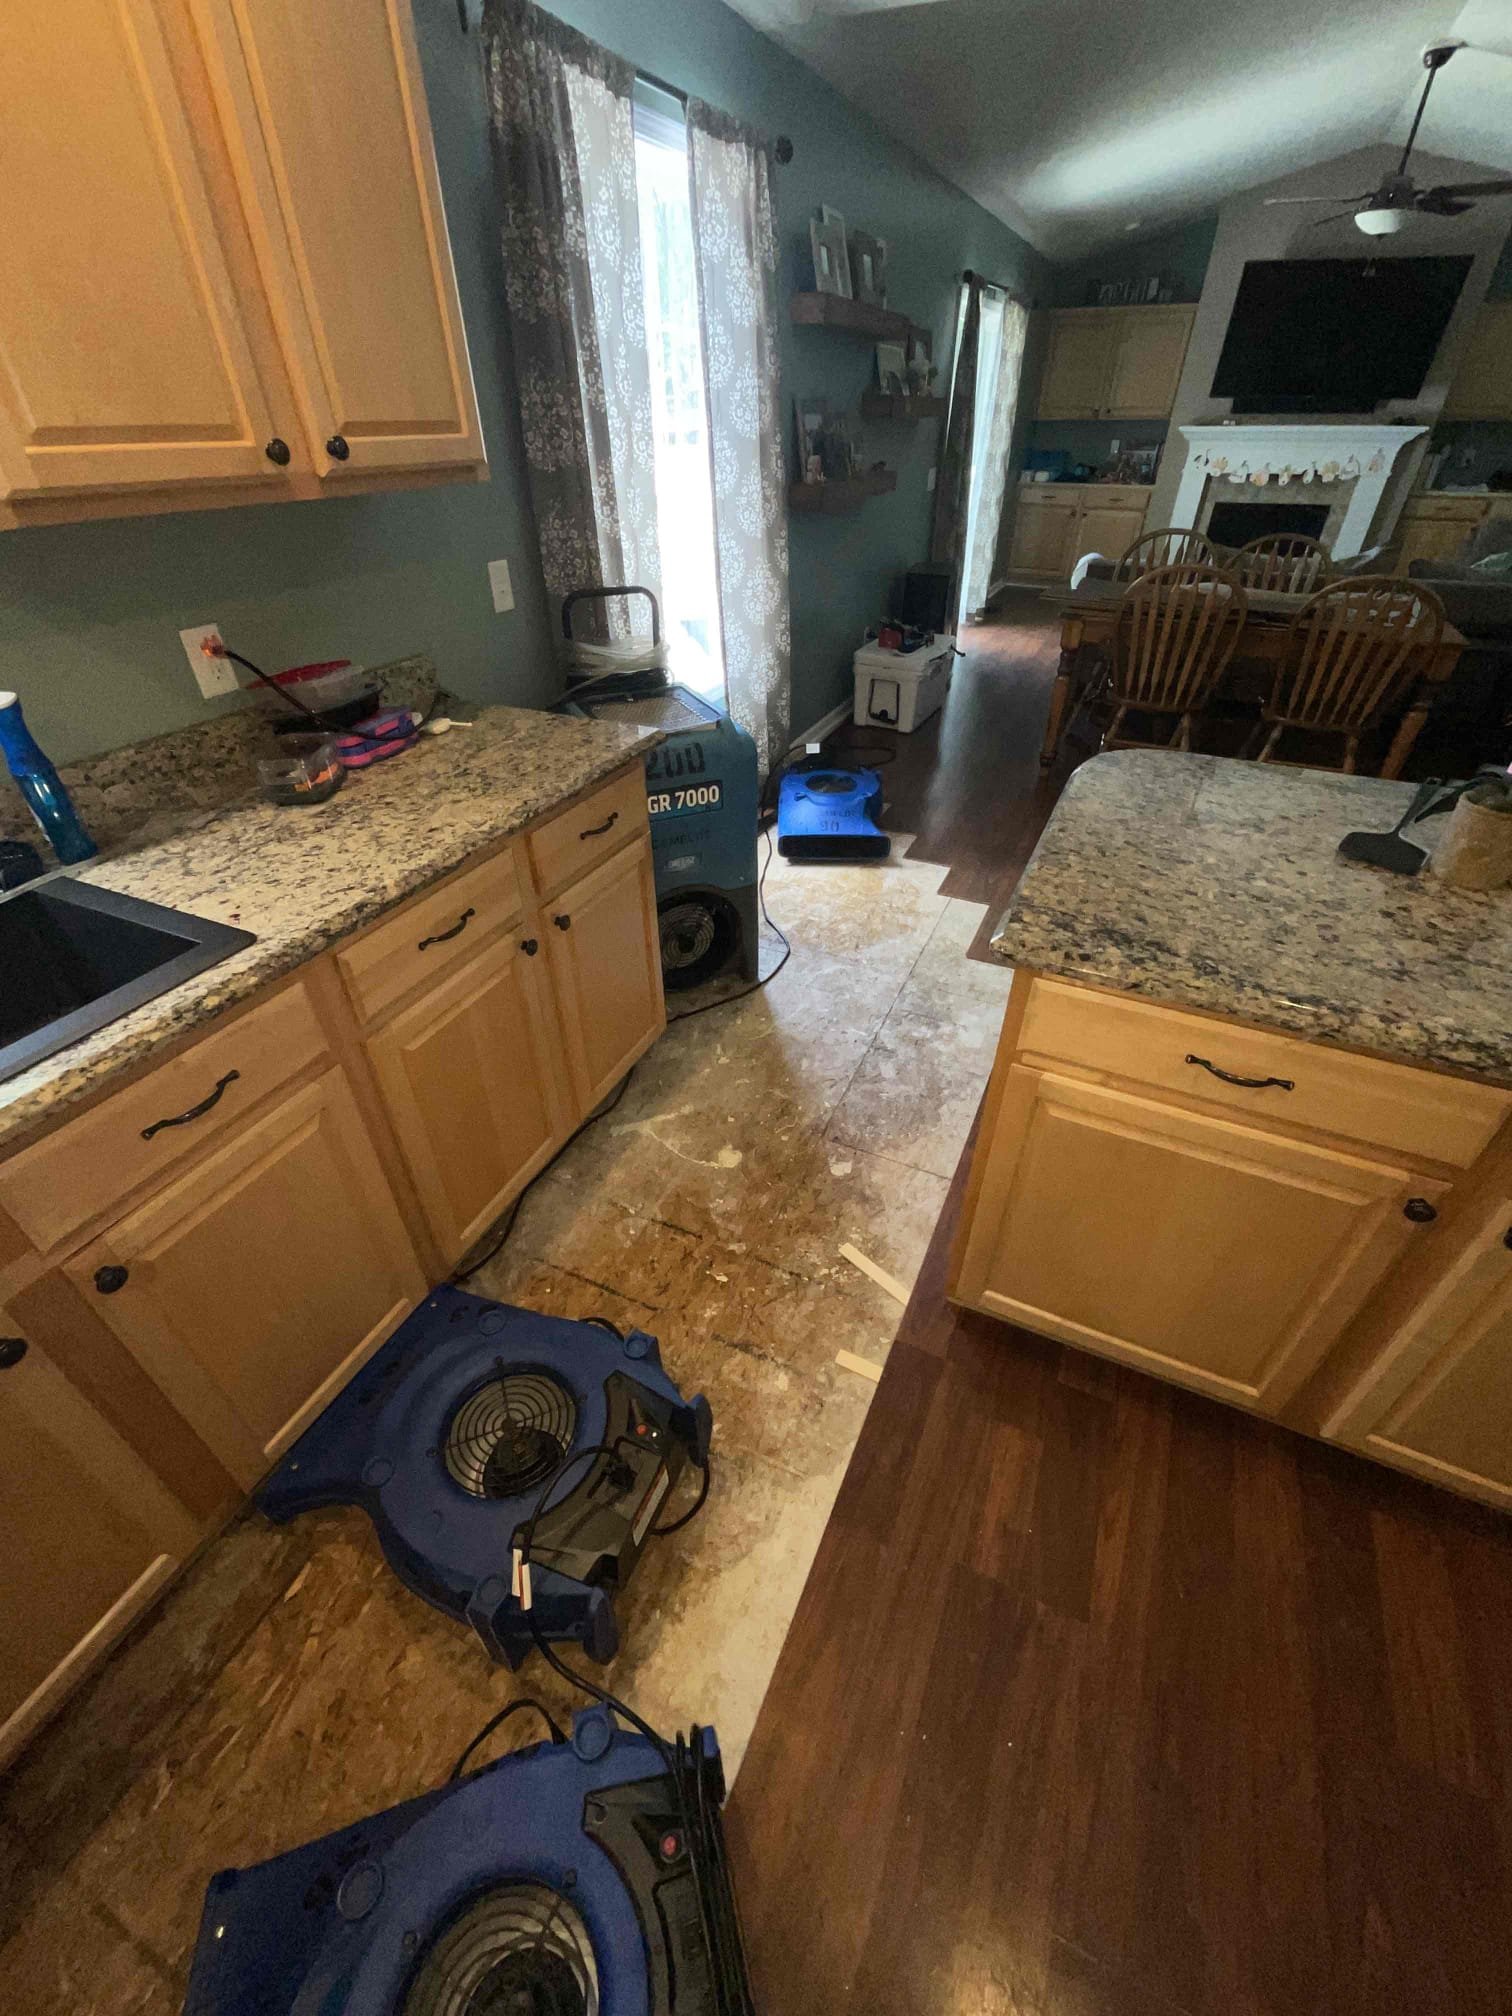 Drying of kitchen after sink leak